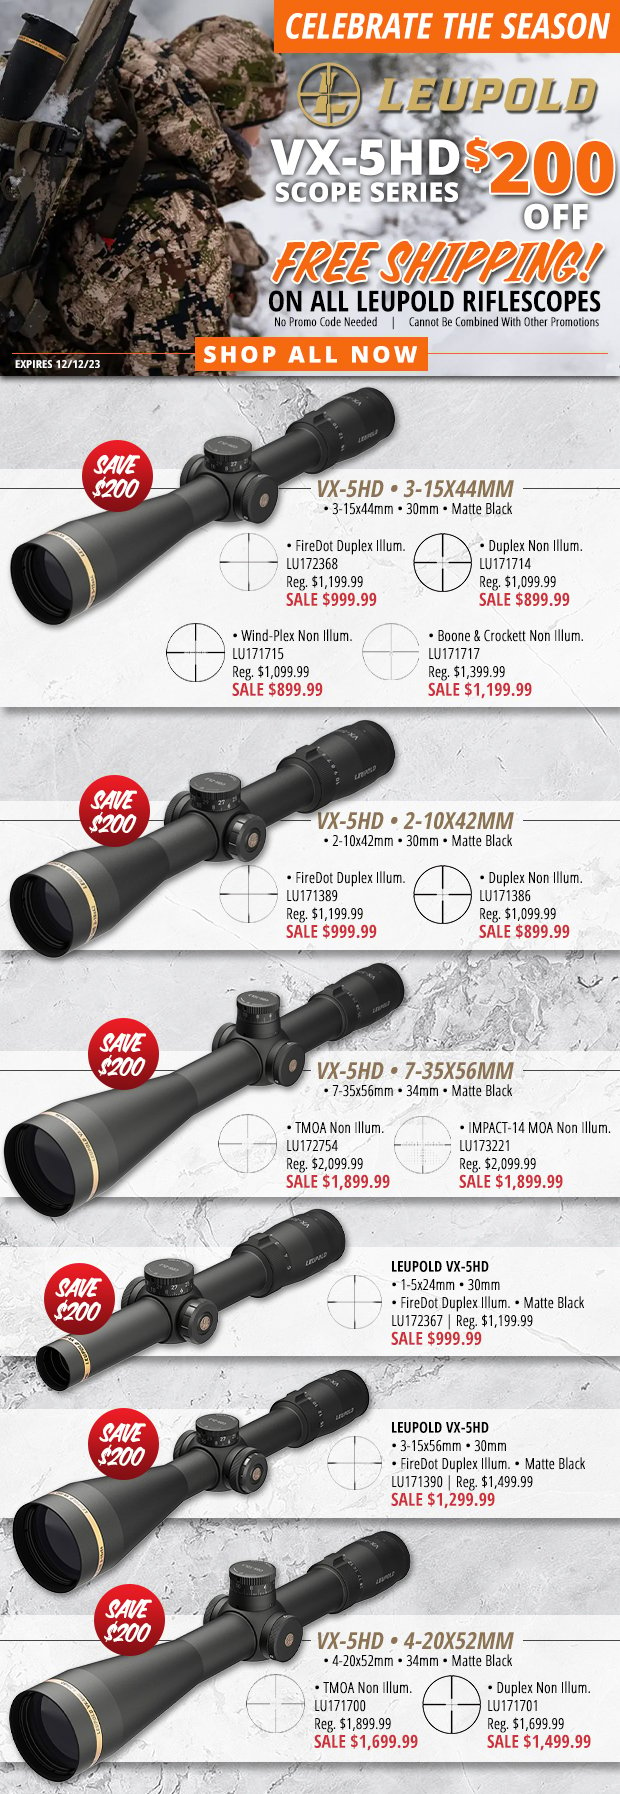 $200 Off the Leupold VX-5HD Scope Series and Free Shipping on All Leupold Riflescopes